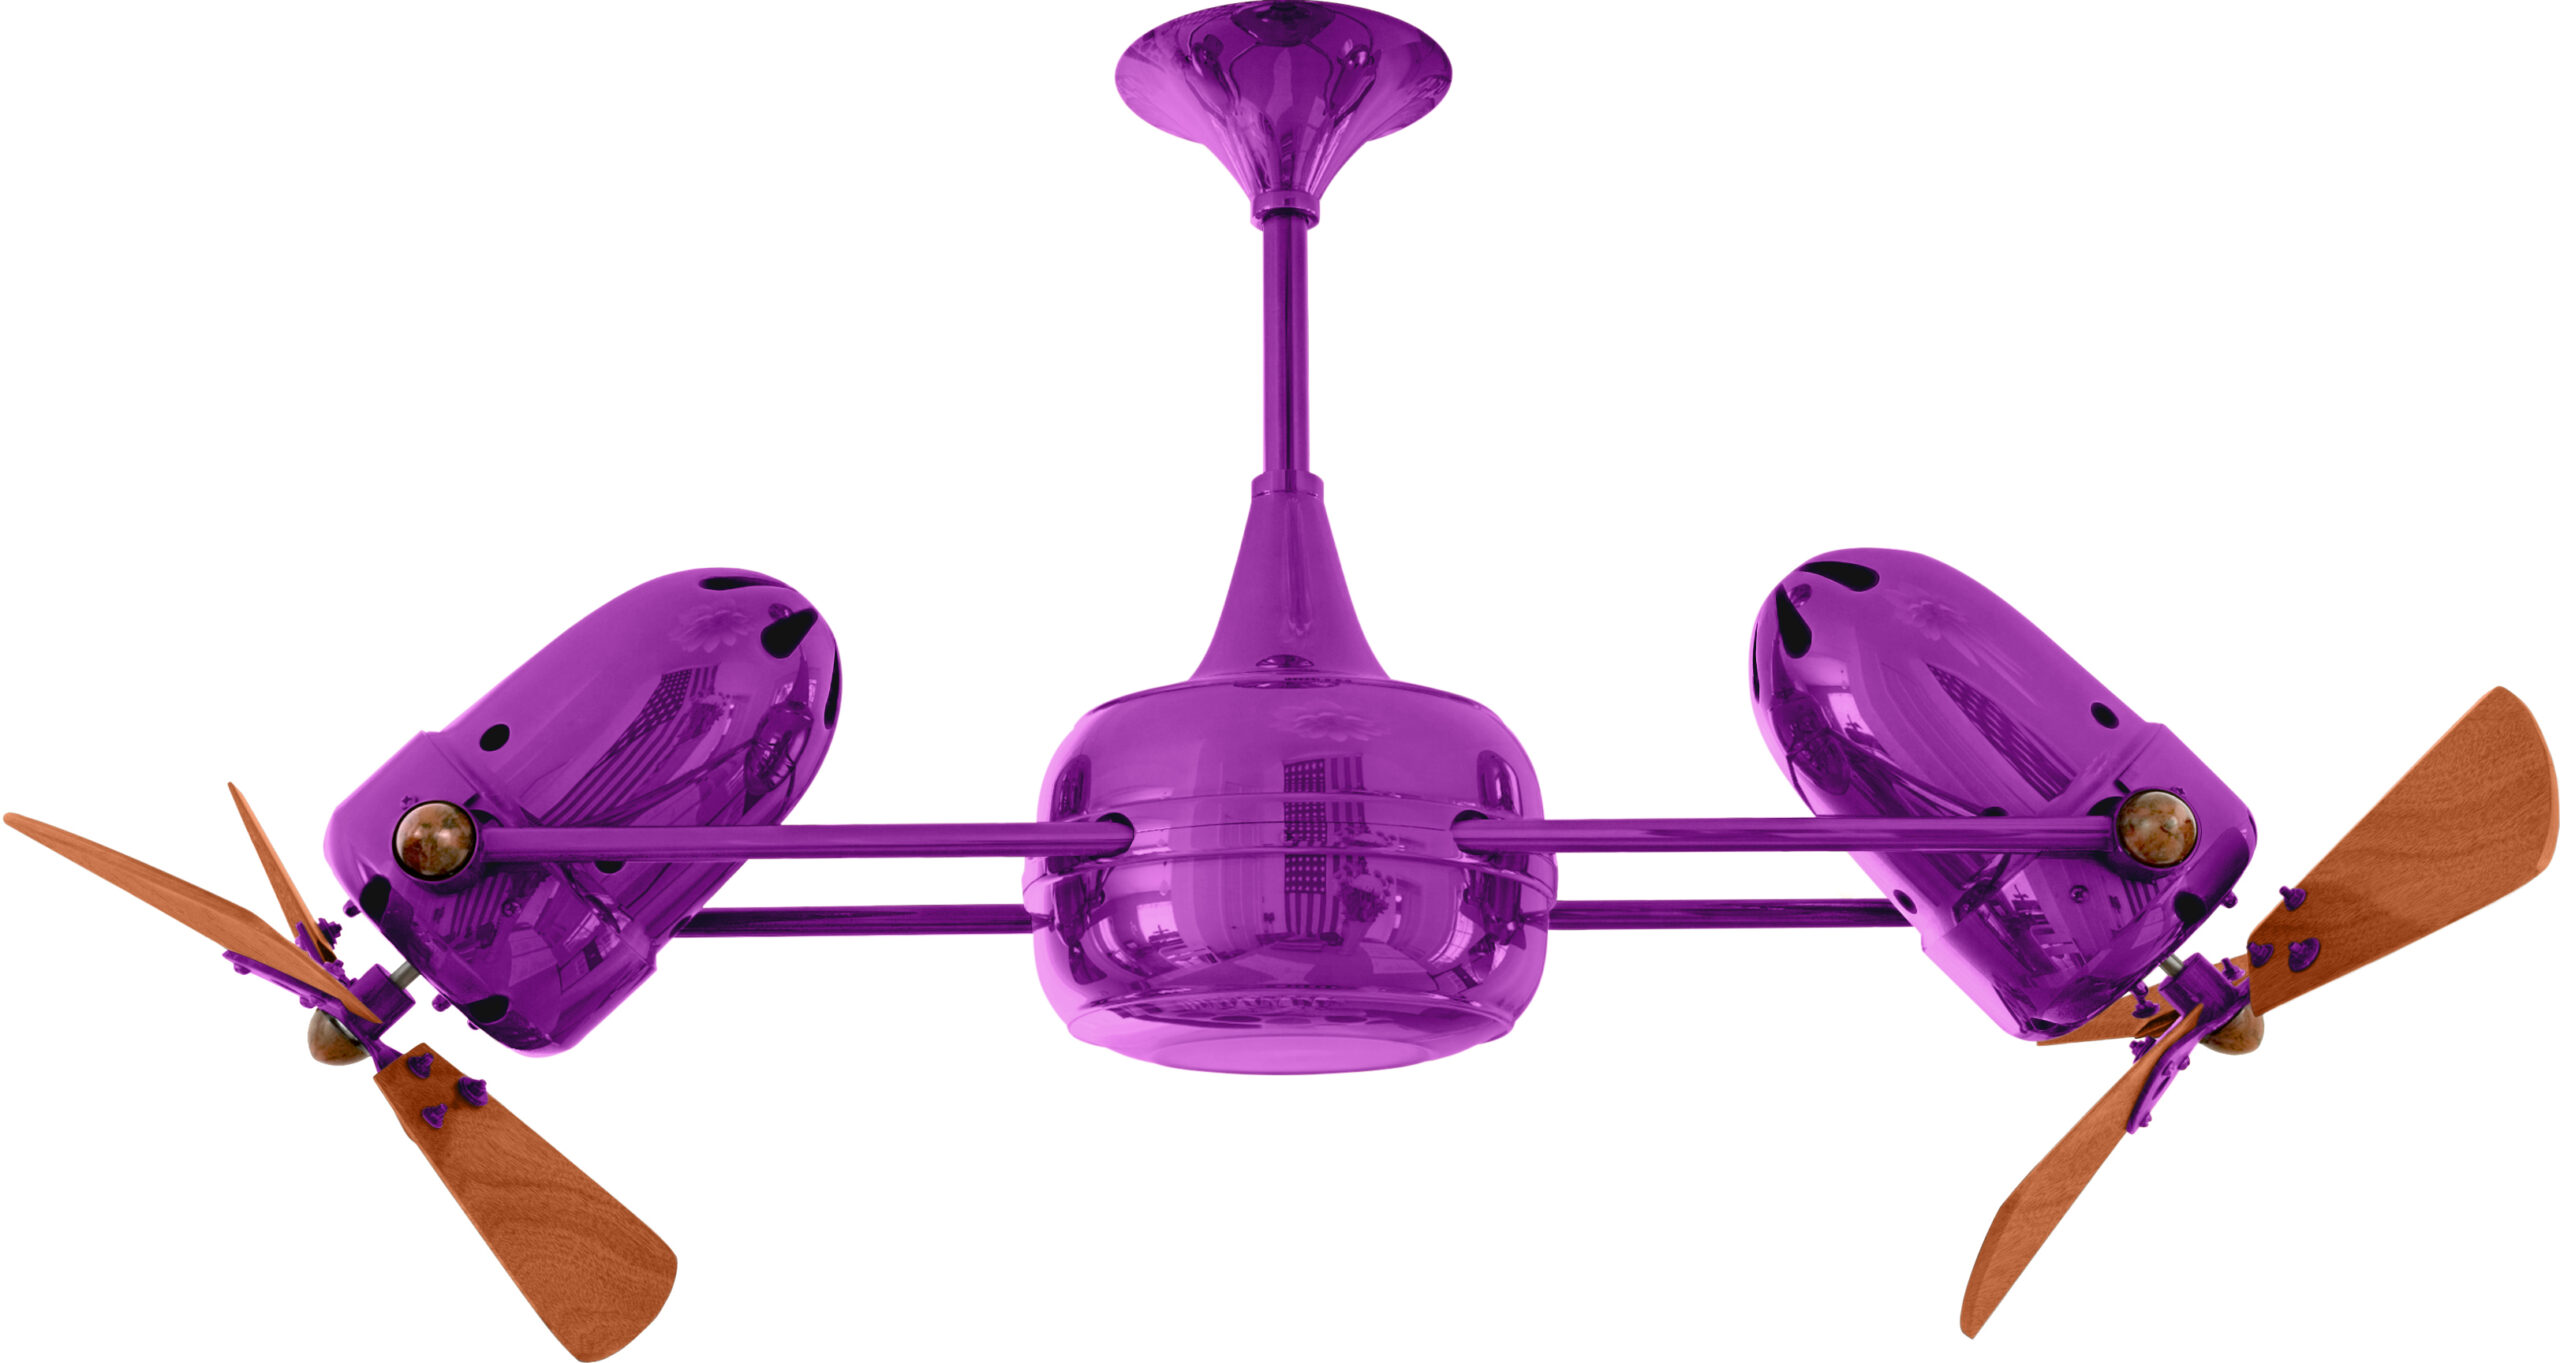 Duplo Dinamico rotational dual head ceiling fan in light purple / ametista finish with solid mahogany wood blades made by Matthews Fan Company.